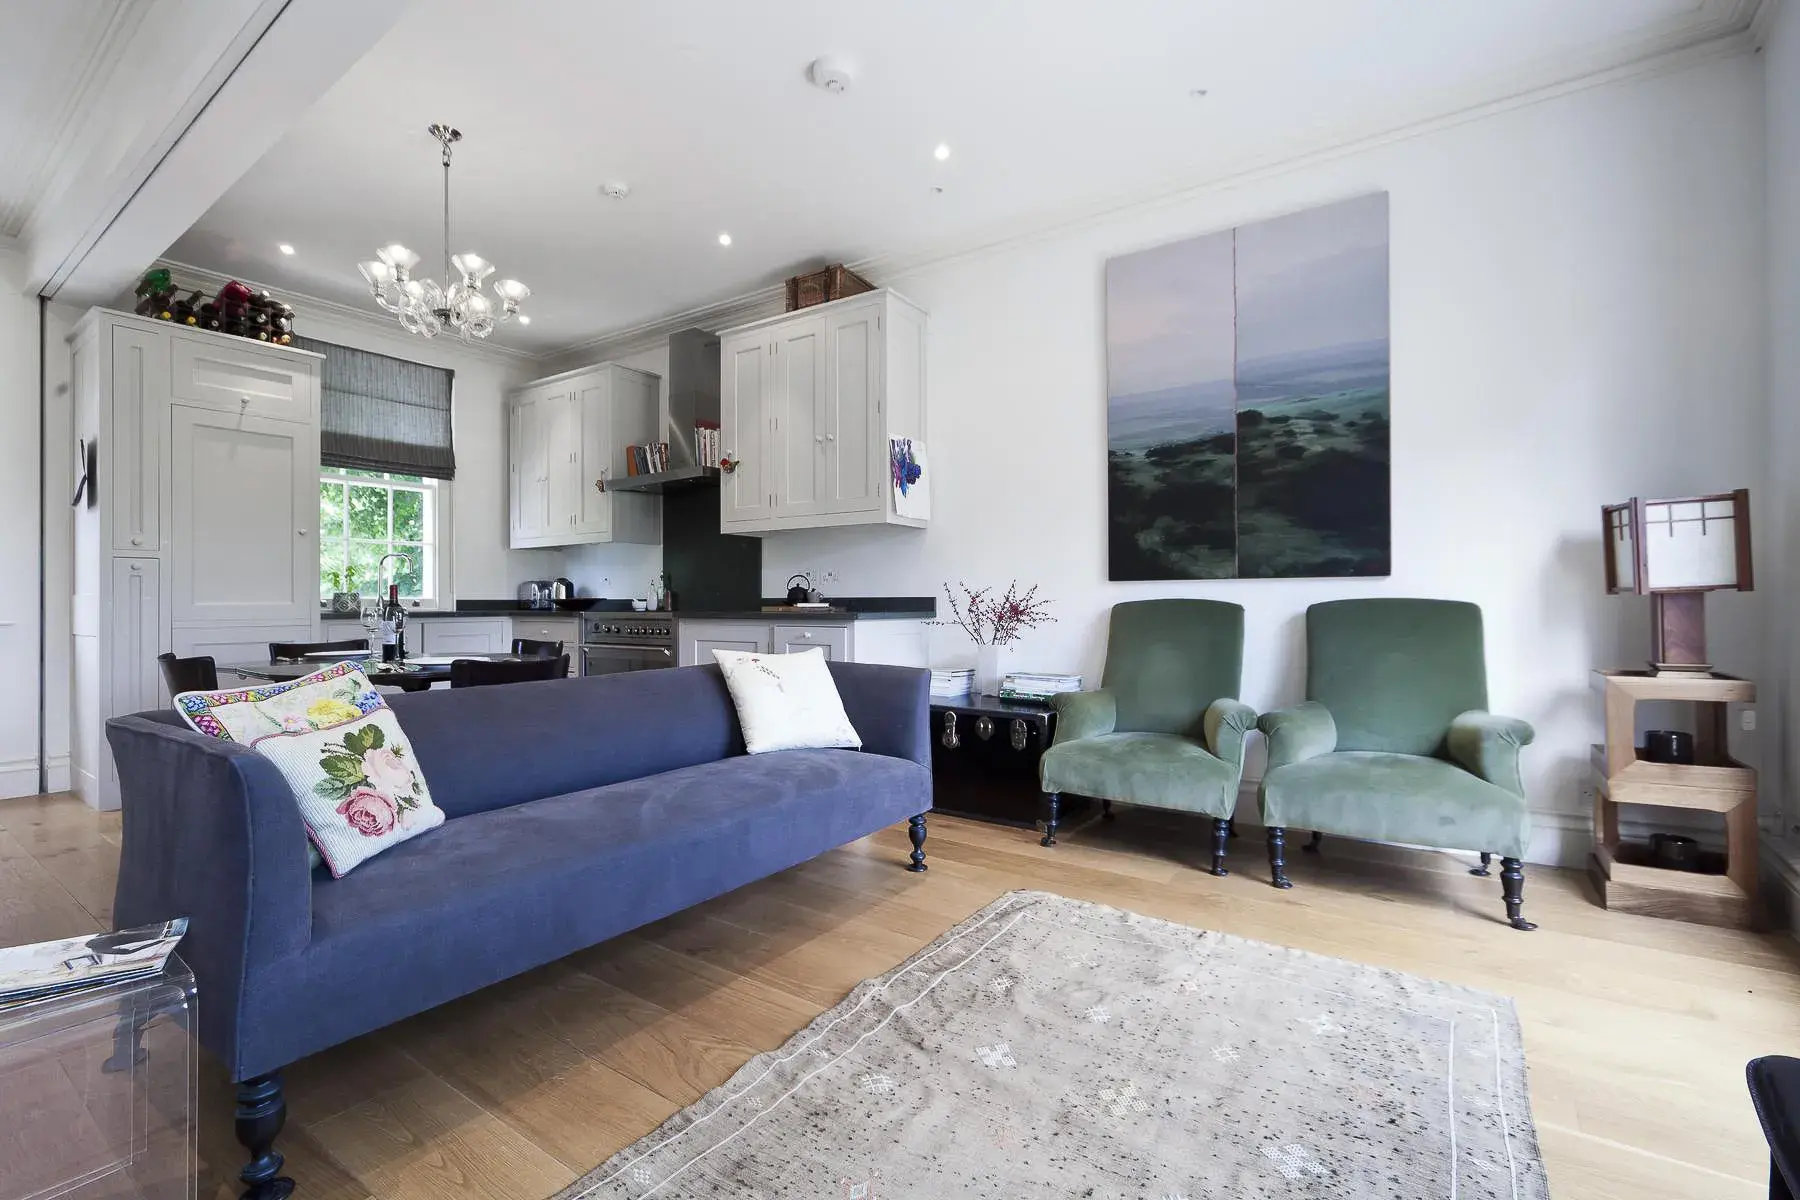 St Anns Road, holiday home in Holland Park, London